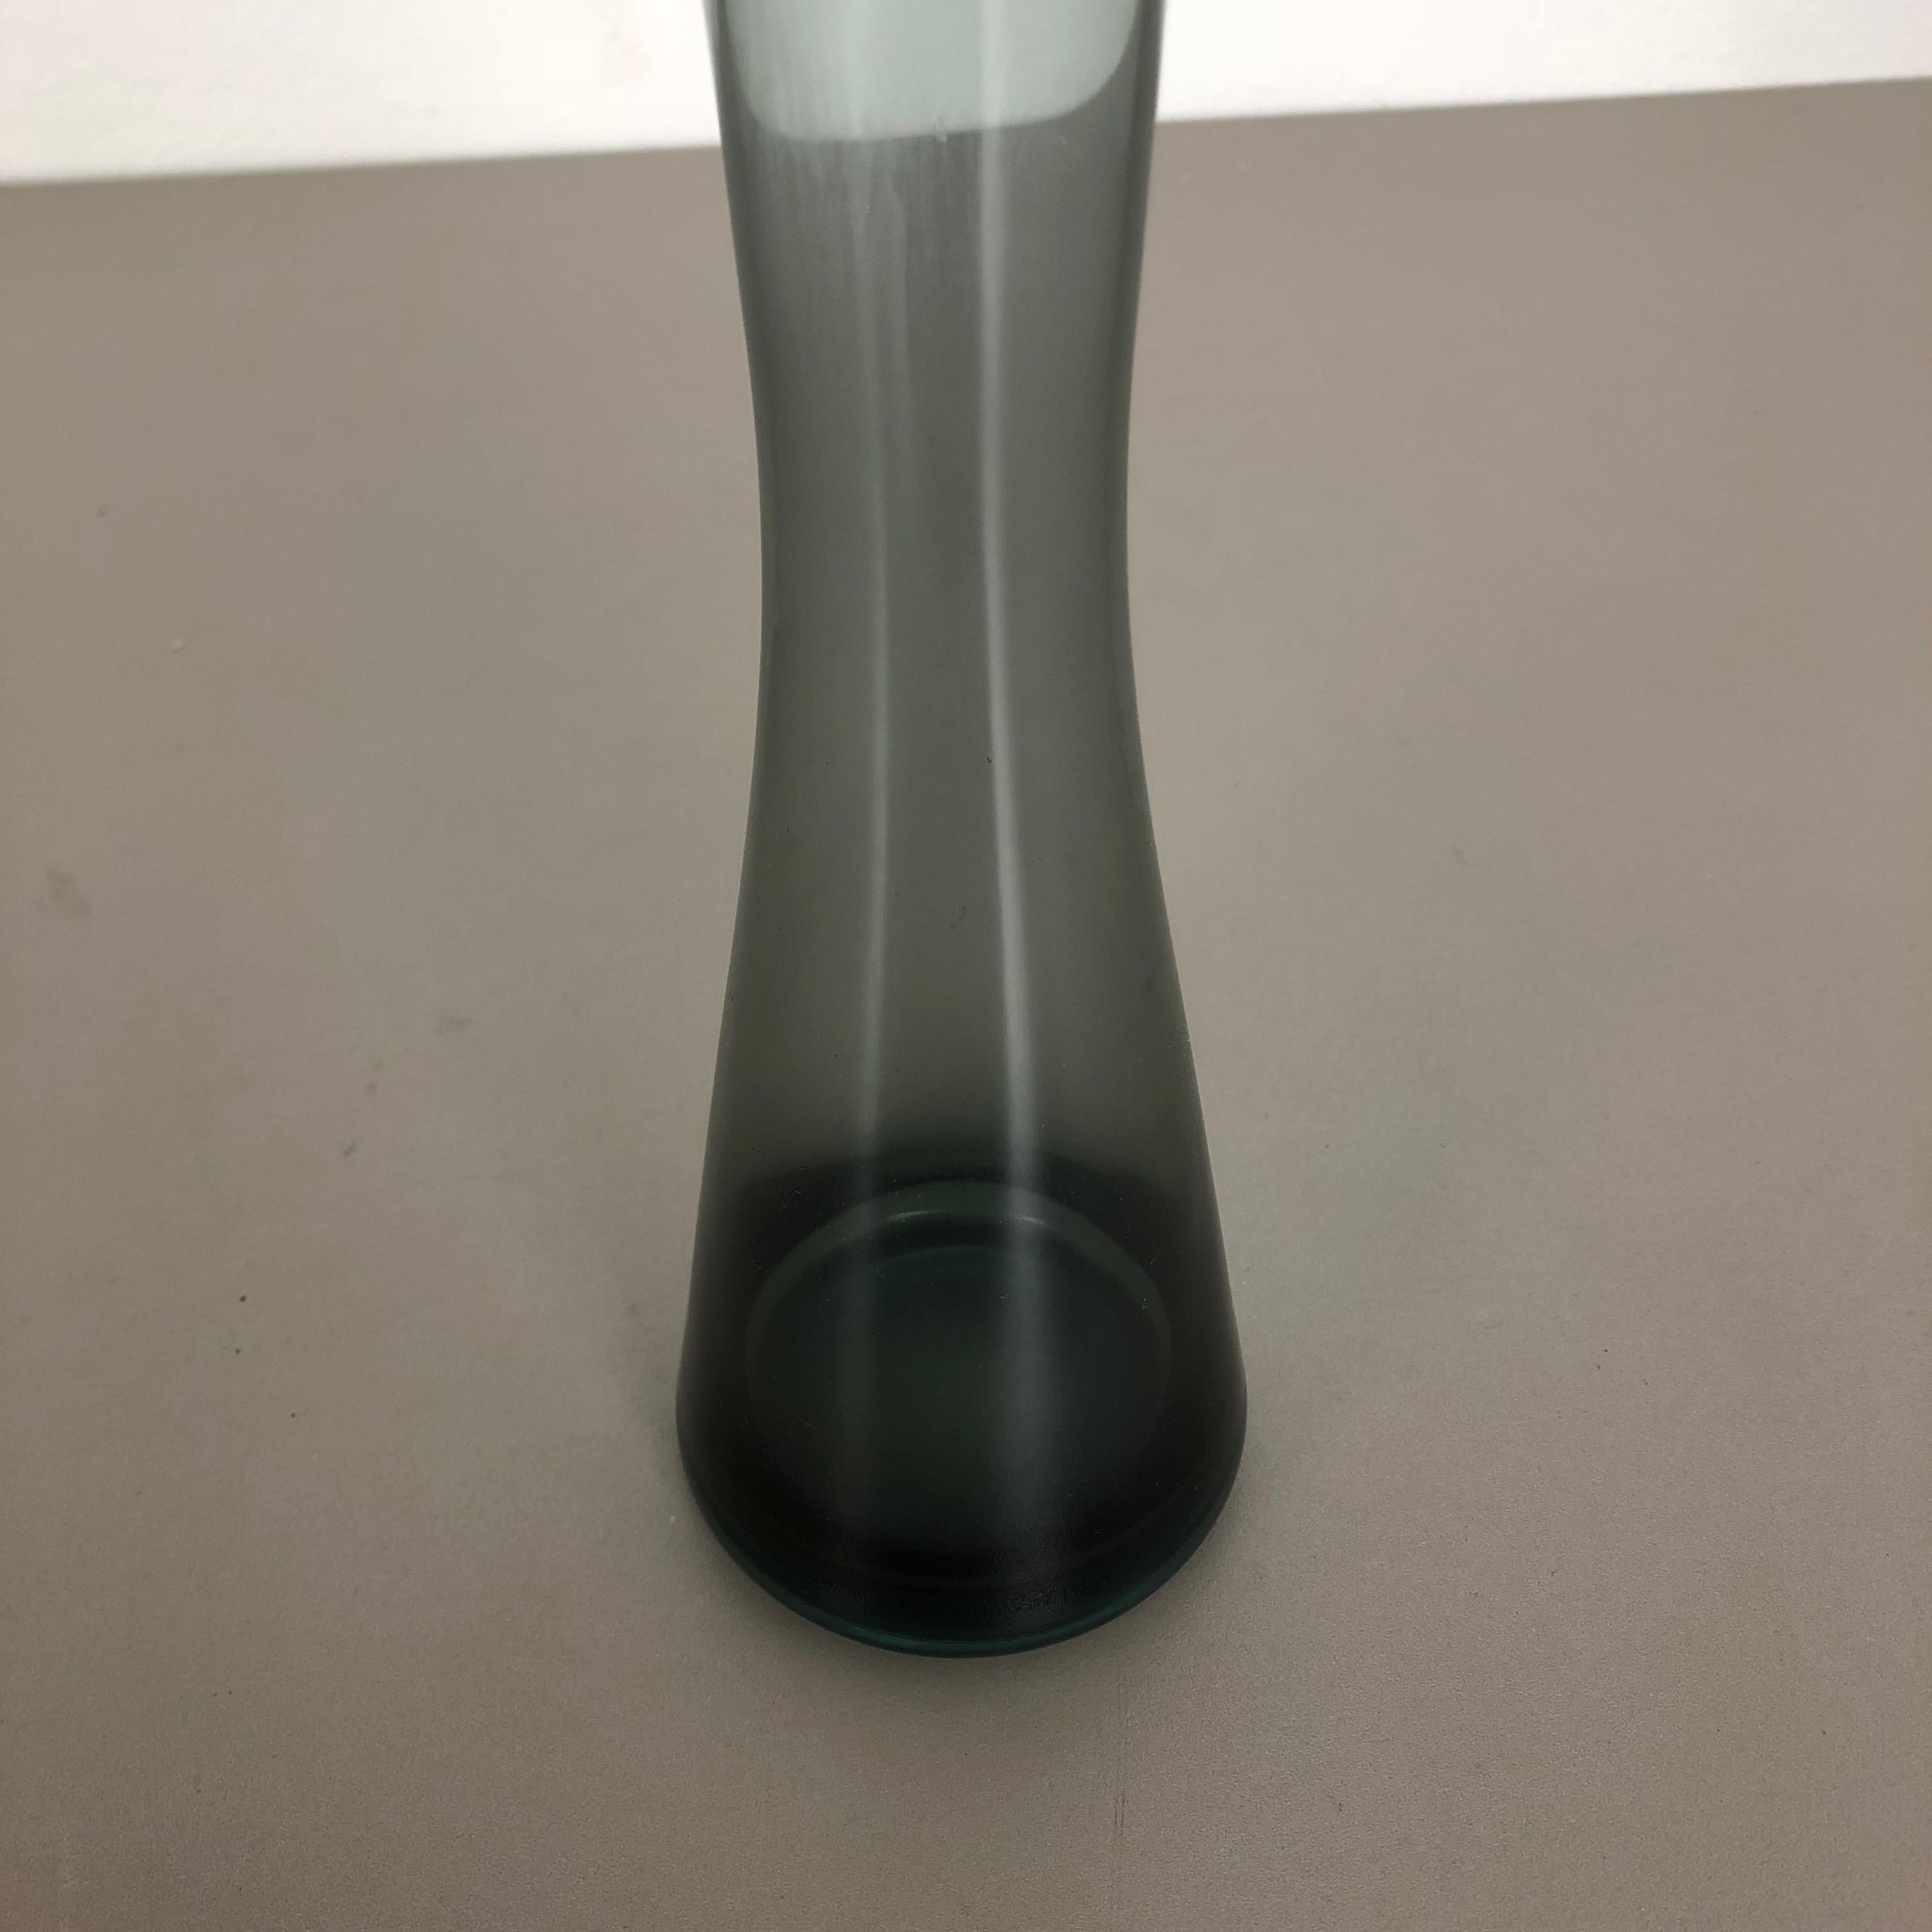 Glass Large Vintage 1960s Turmalin Vase by Wilhelm Wagenfeld for WMF, Germany Bauhaus For Sale